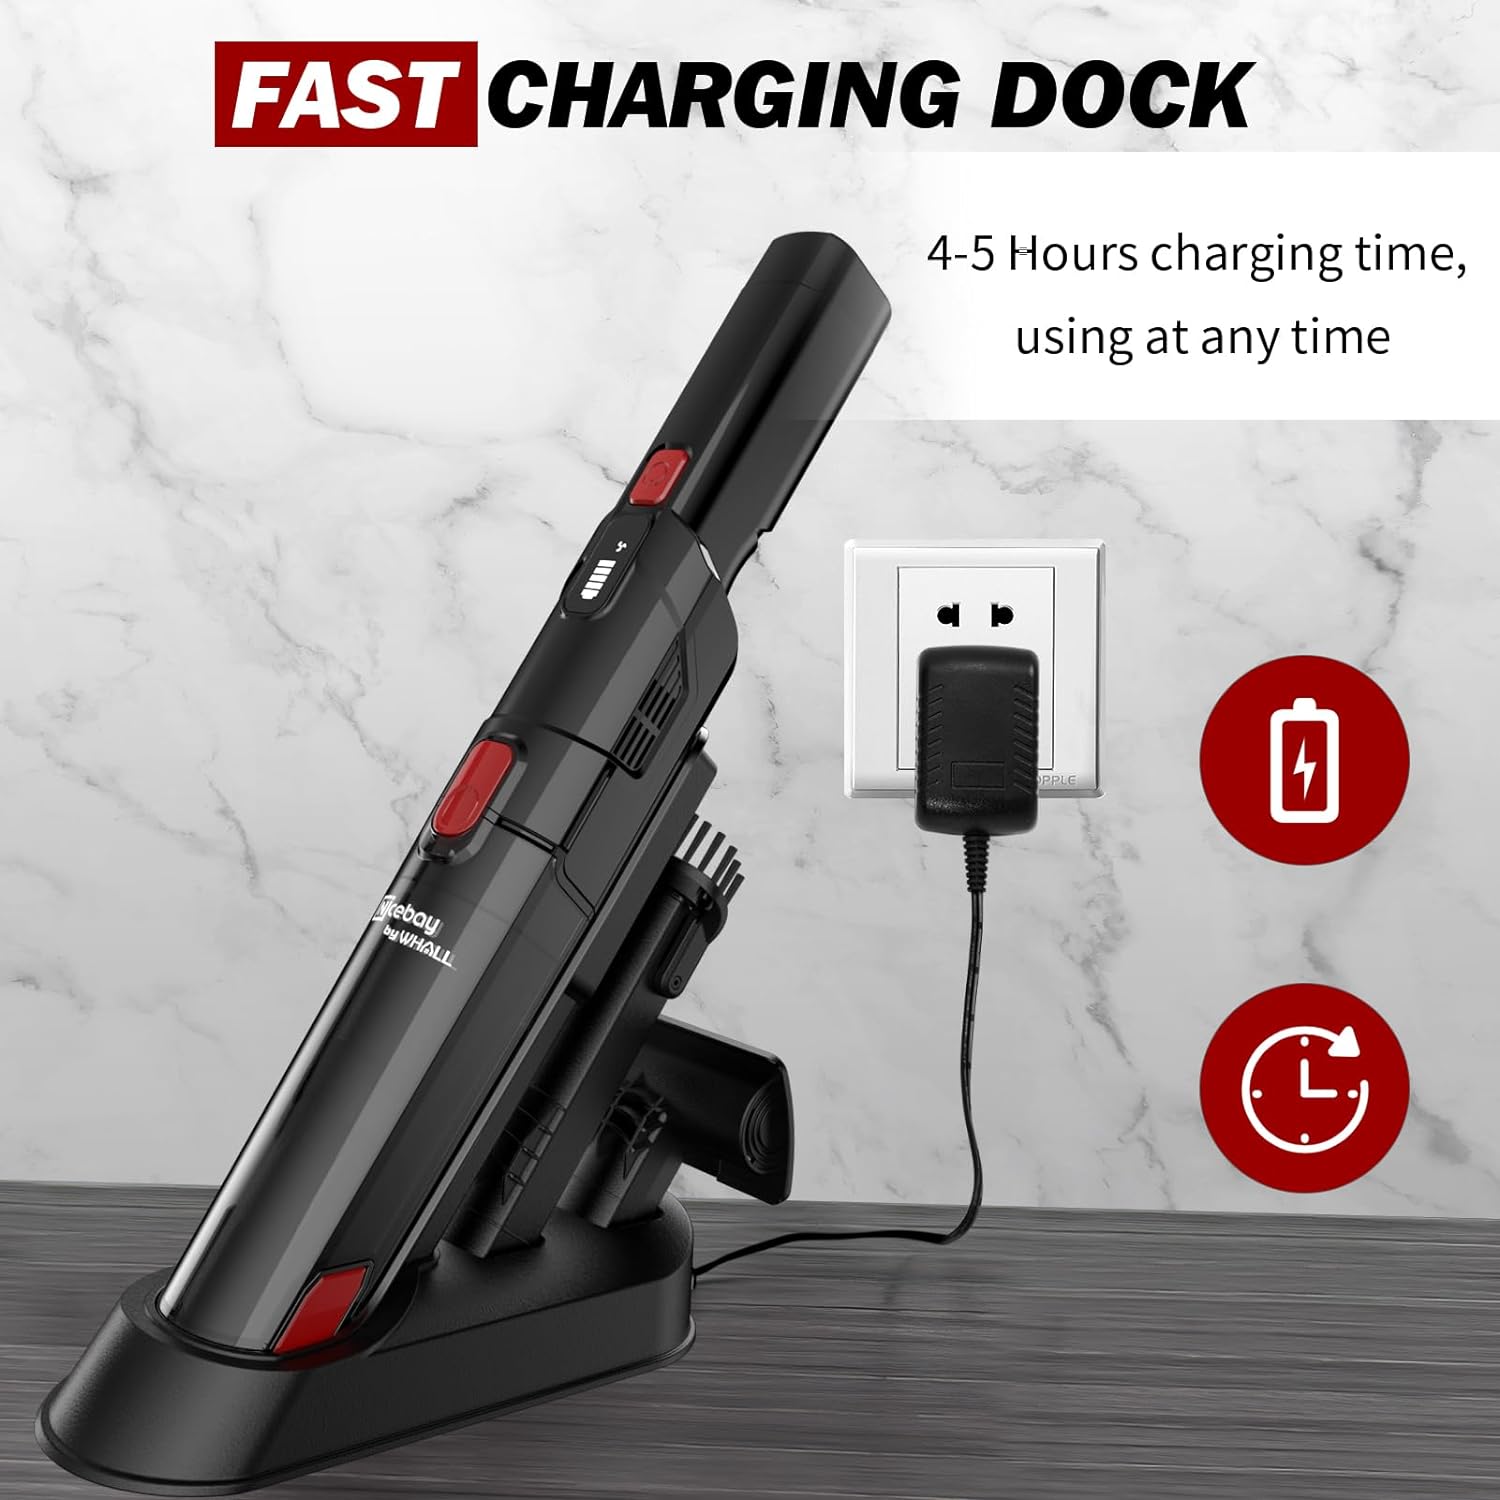 wurese Cordless Handheld Vacuum, Hand Vacuum Cleaner 15KPA Powerful Suction with Fast Charging Dock, Portable Lightweight Cleaner, Rechargeable Hand Held Vacuum Cleaner for Home, Office, Pet and Car